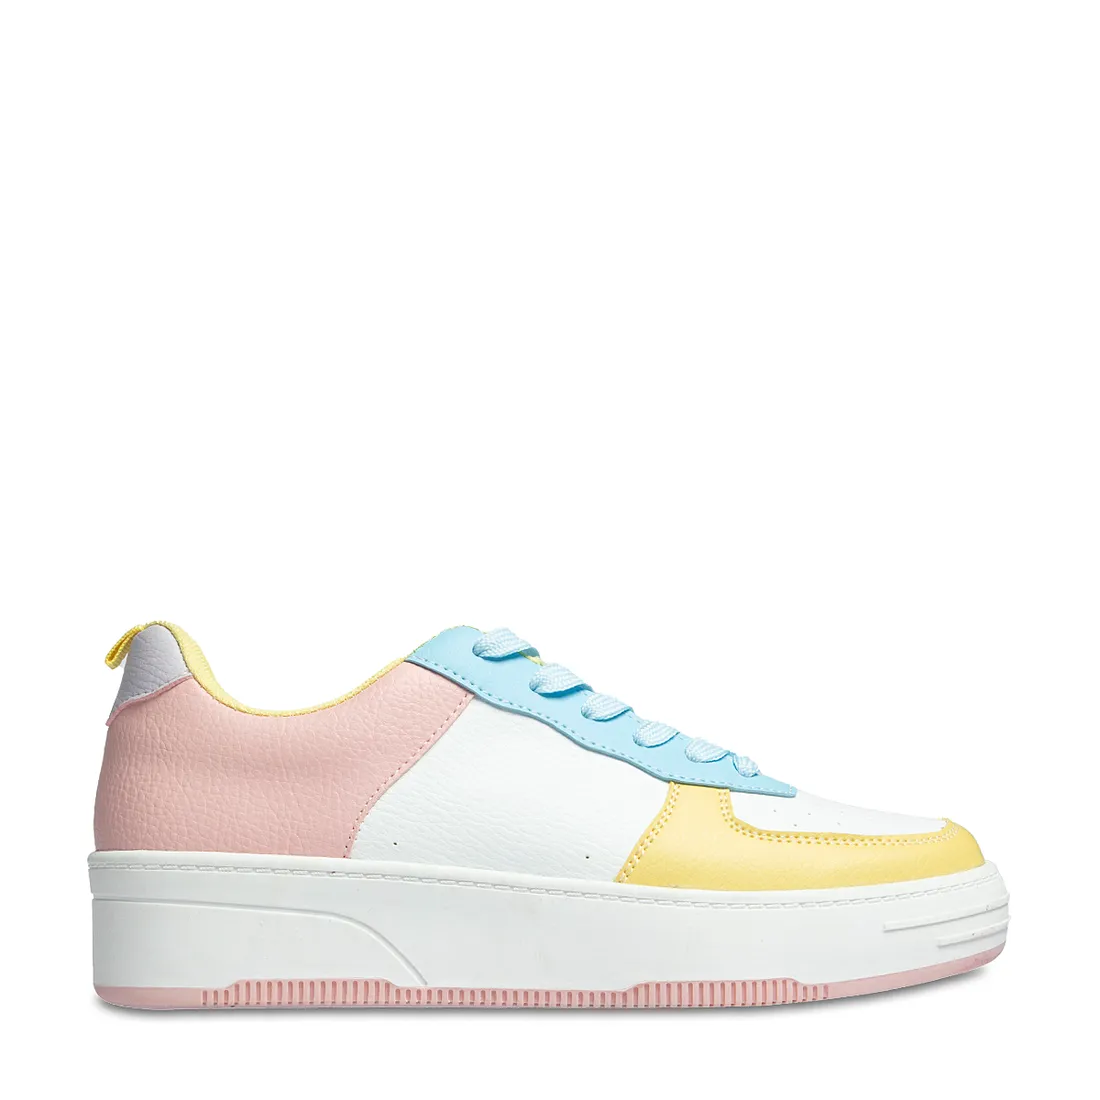 Colour block sneaker pink, blue & yellow - GIRLS 7-15 YEARS Shoes ...